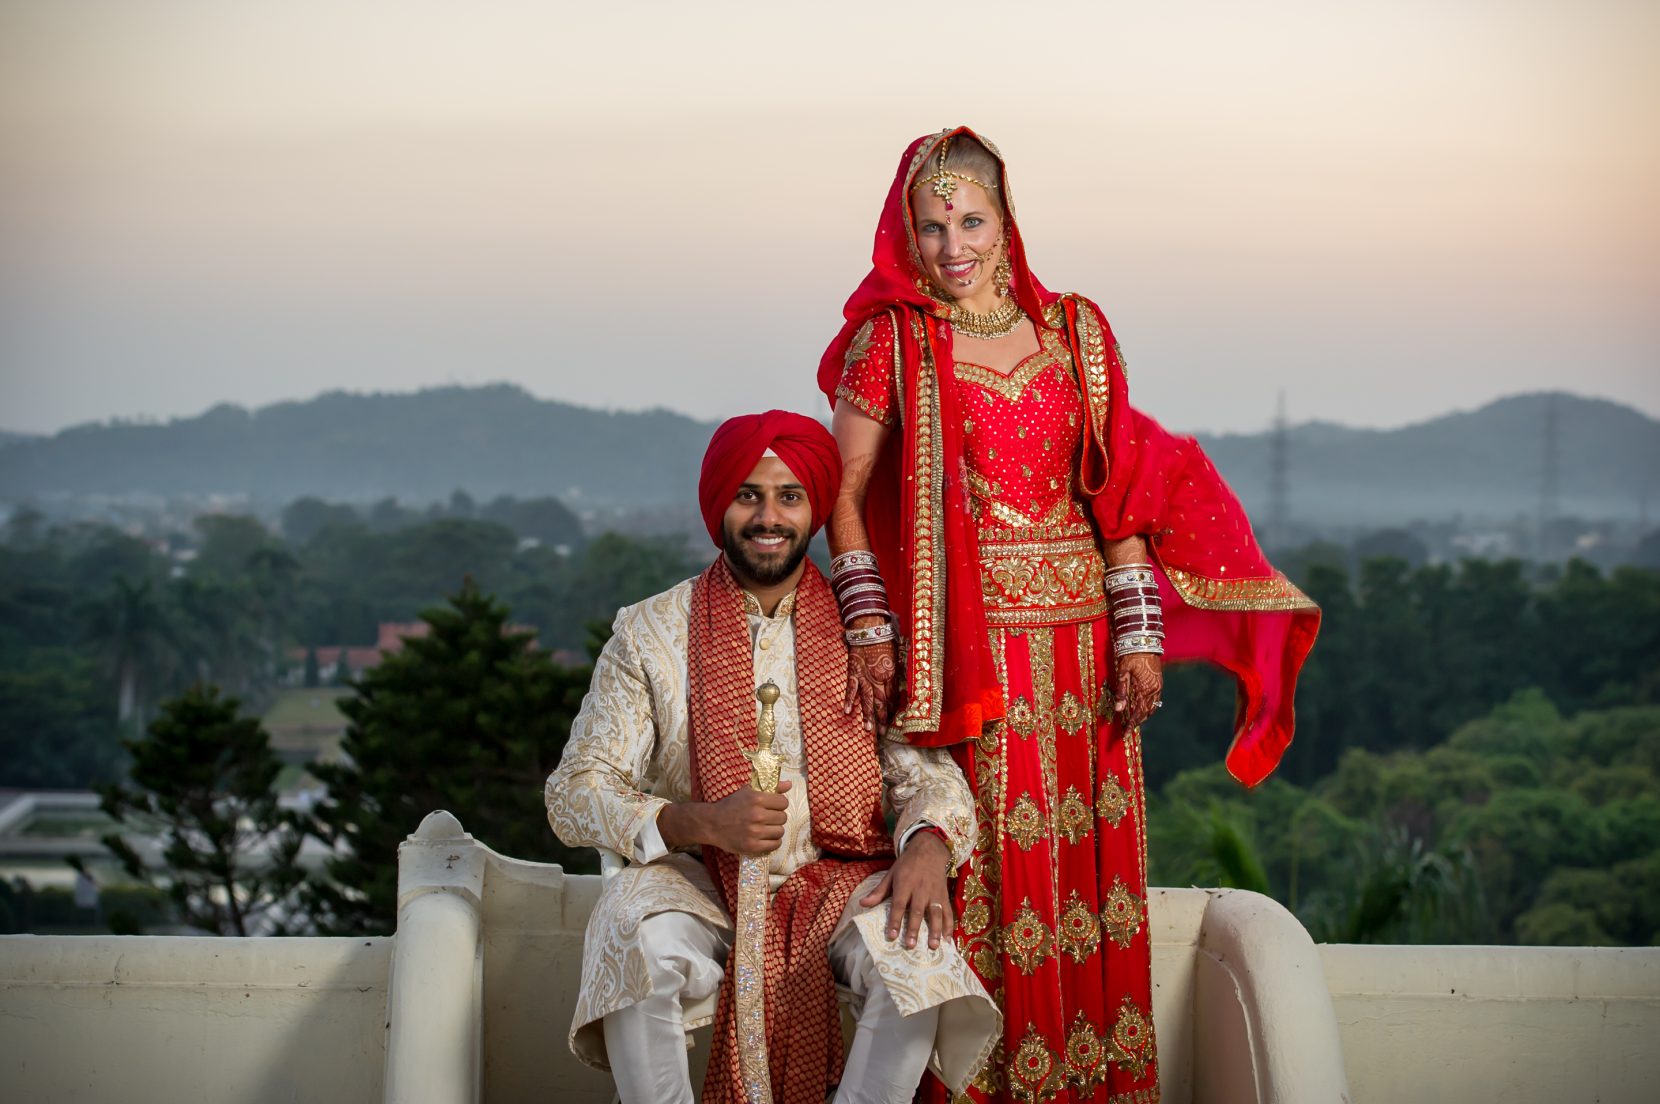 couple portrait on rooftop at sunset chandigarh biracial